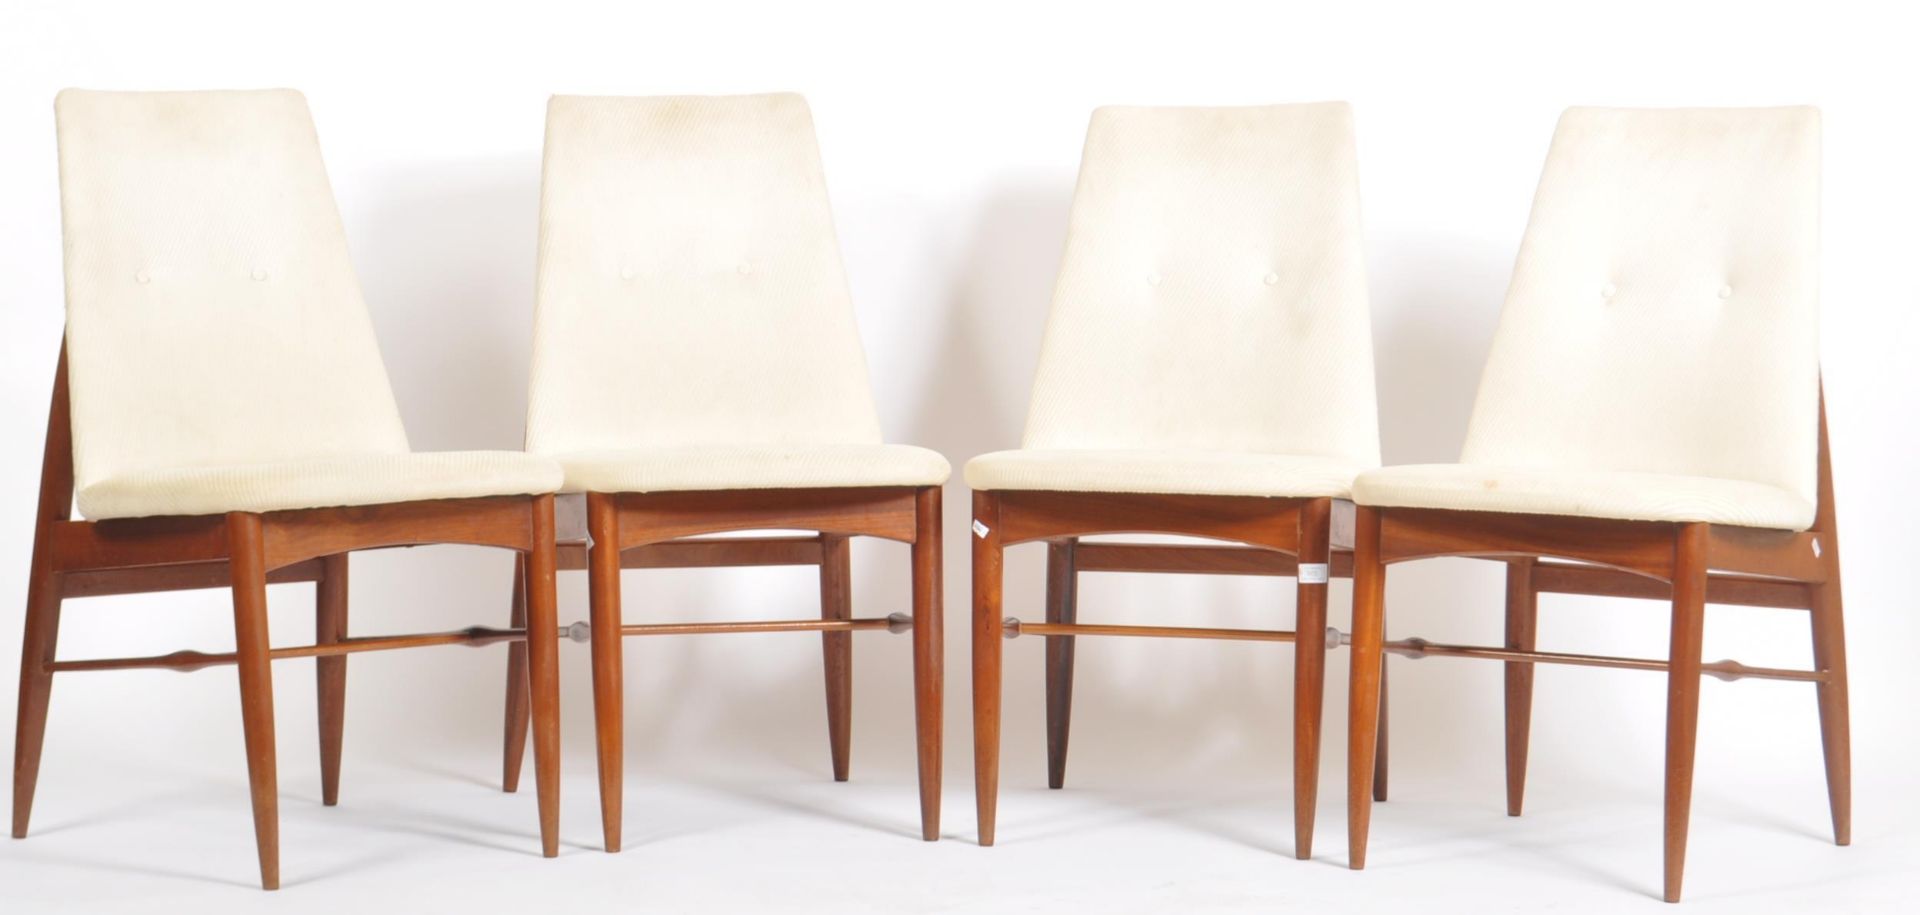 PETER HAYWARD FOR VANSON - MATCHING SET OF FOUR DINING CHAIRS